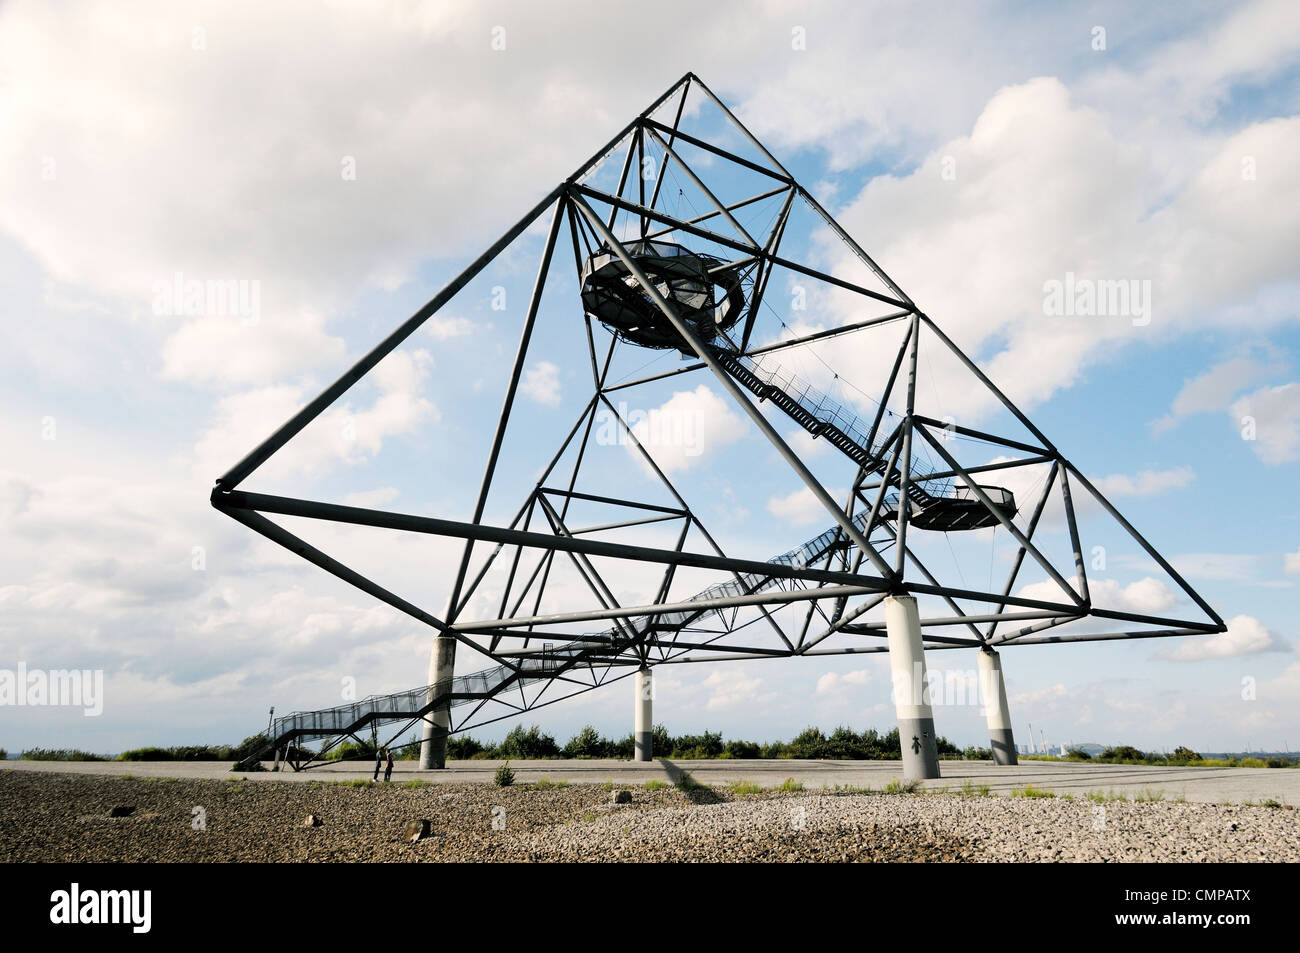 Das Tetraeder, Large tetrahedron sculpture with viewing platforms on old coalmining spoil heap at Bottrop, Ruhr Valley, Germany Stock Photo